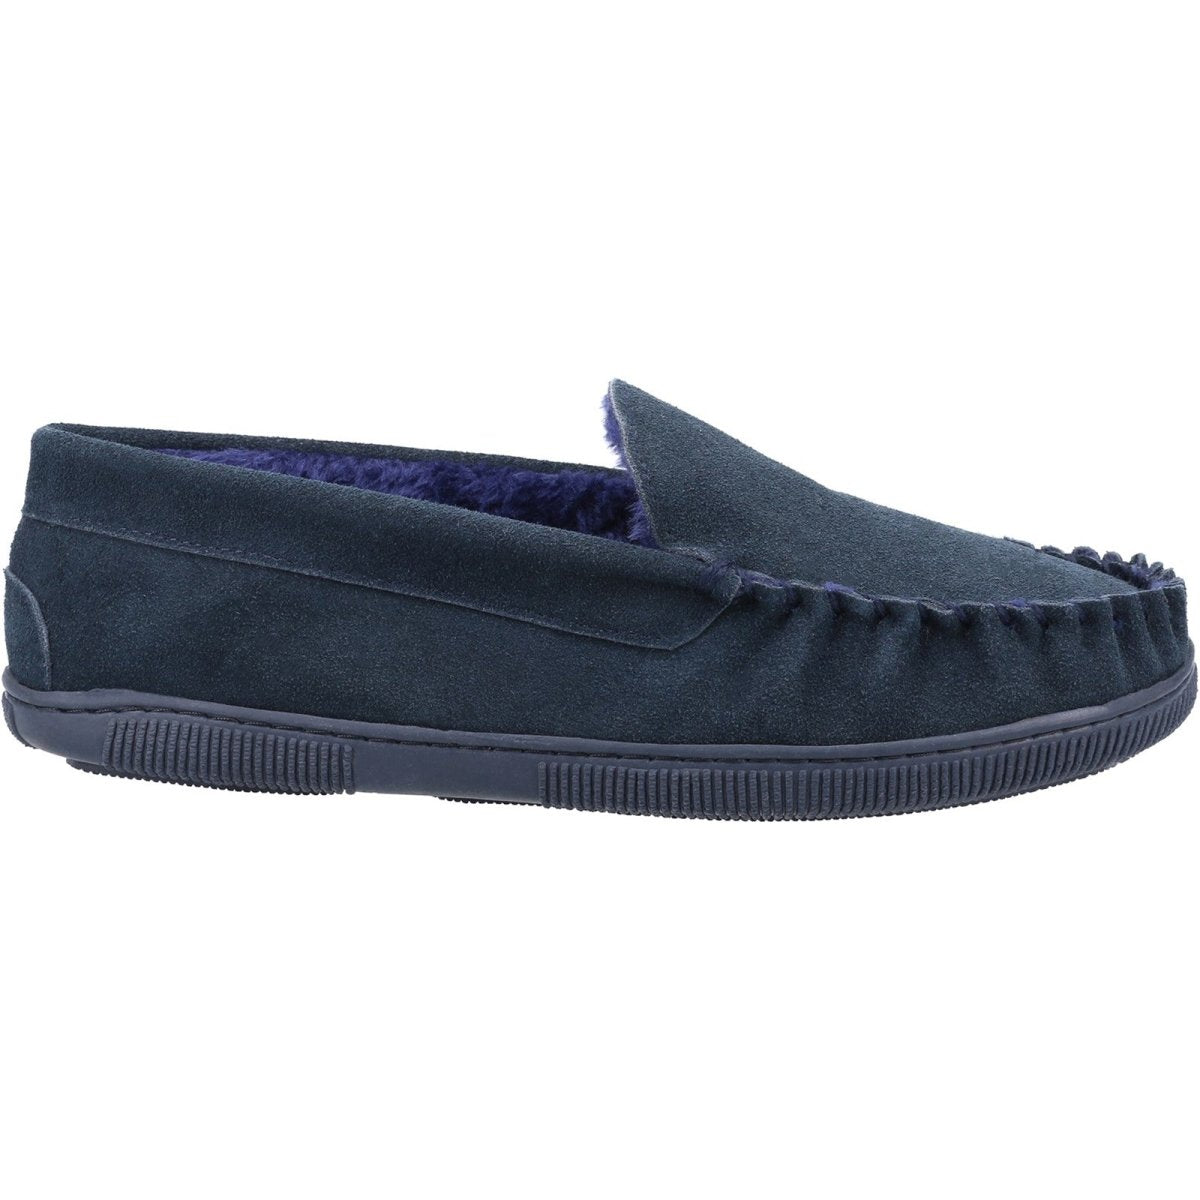 Cotswold Tresham Suede Mens Moccasin Slippers - Shoe Store Direct